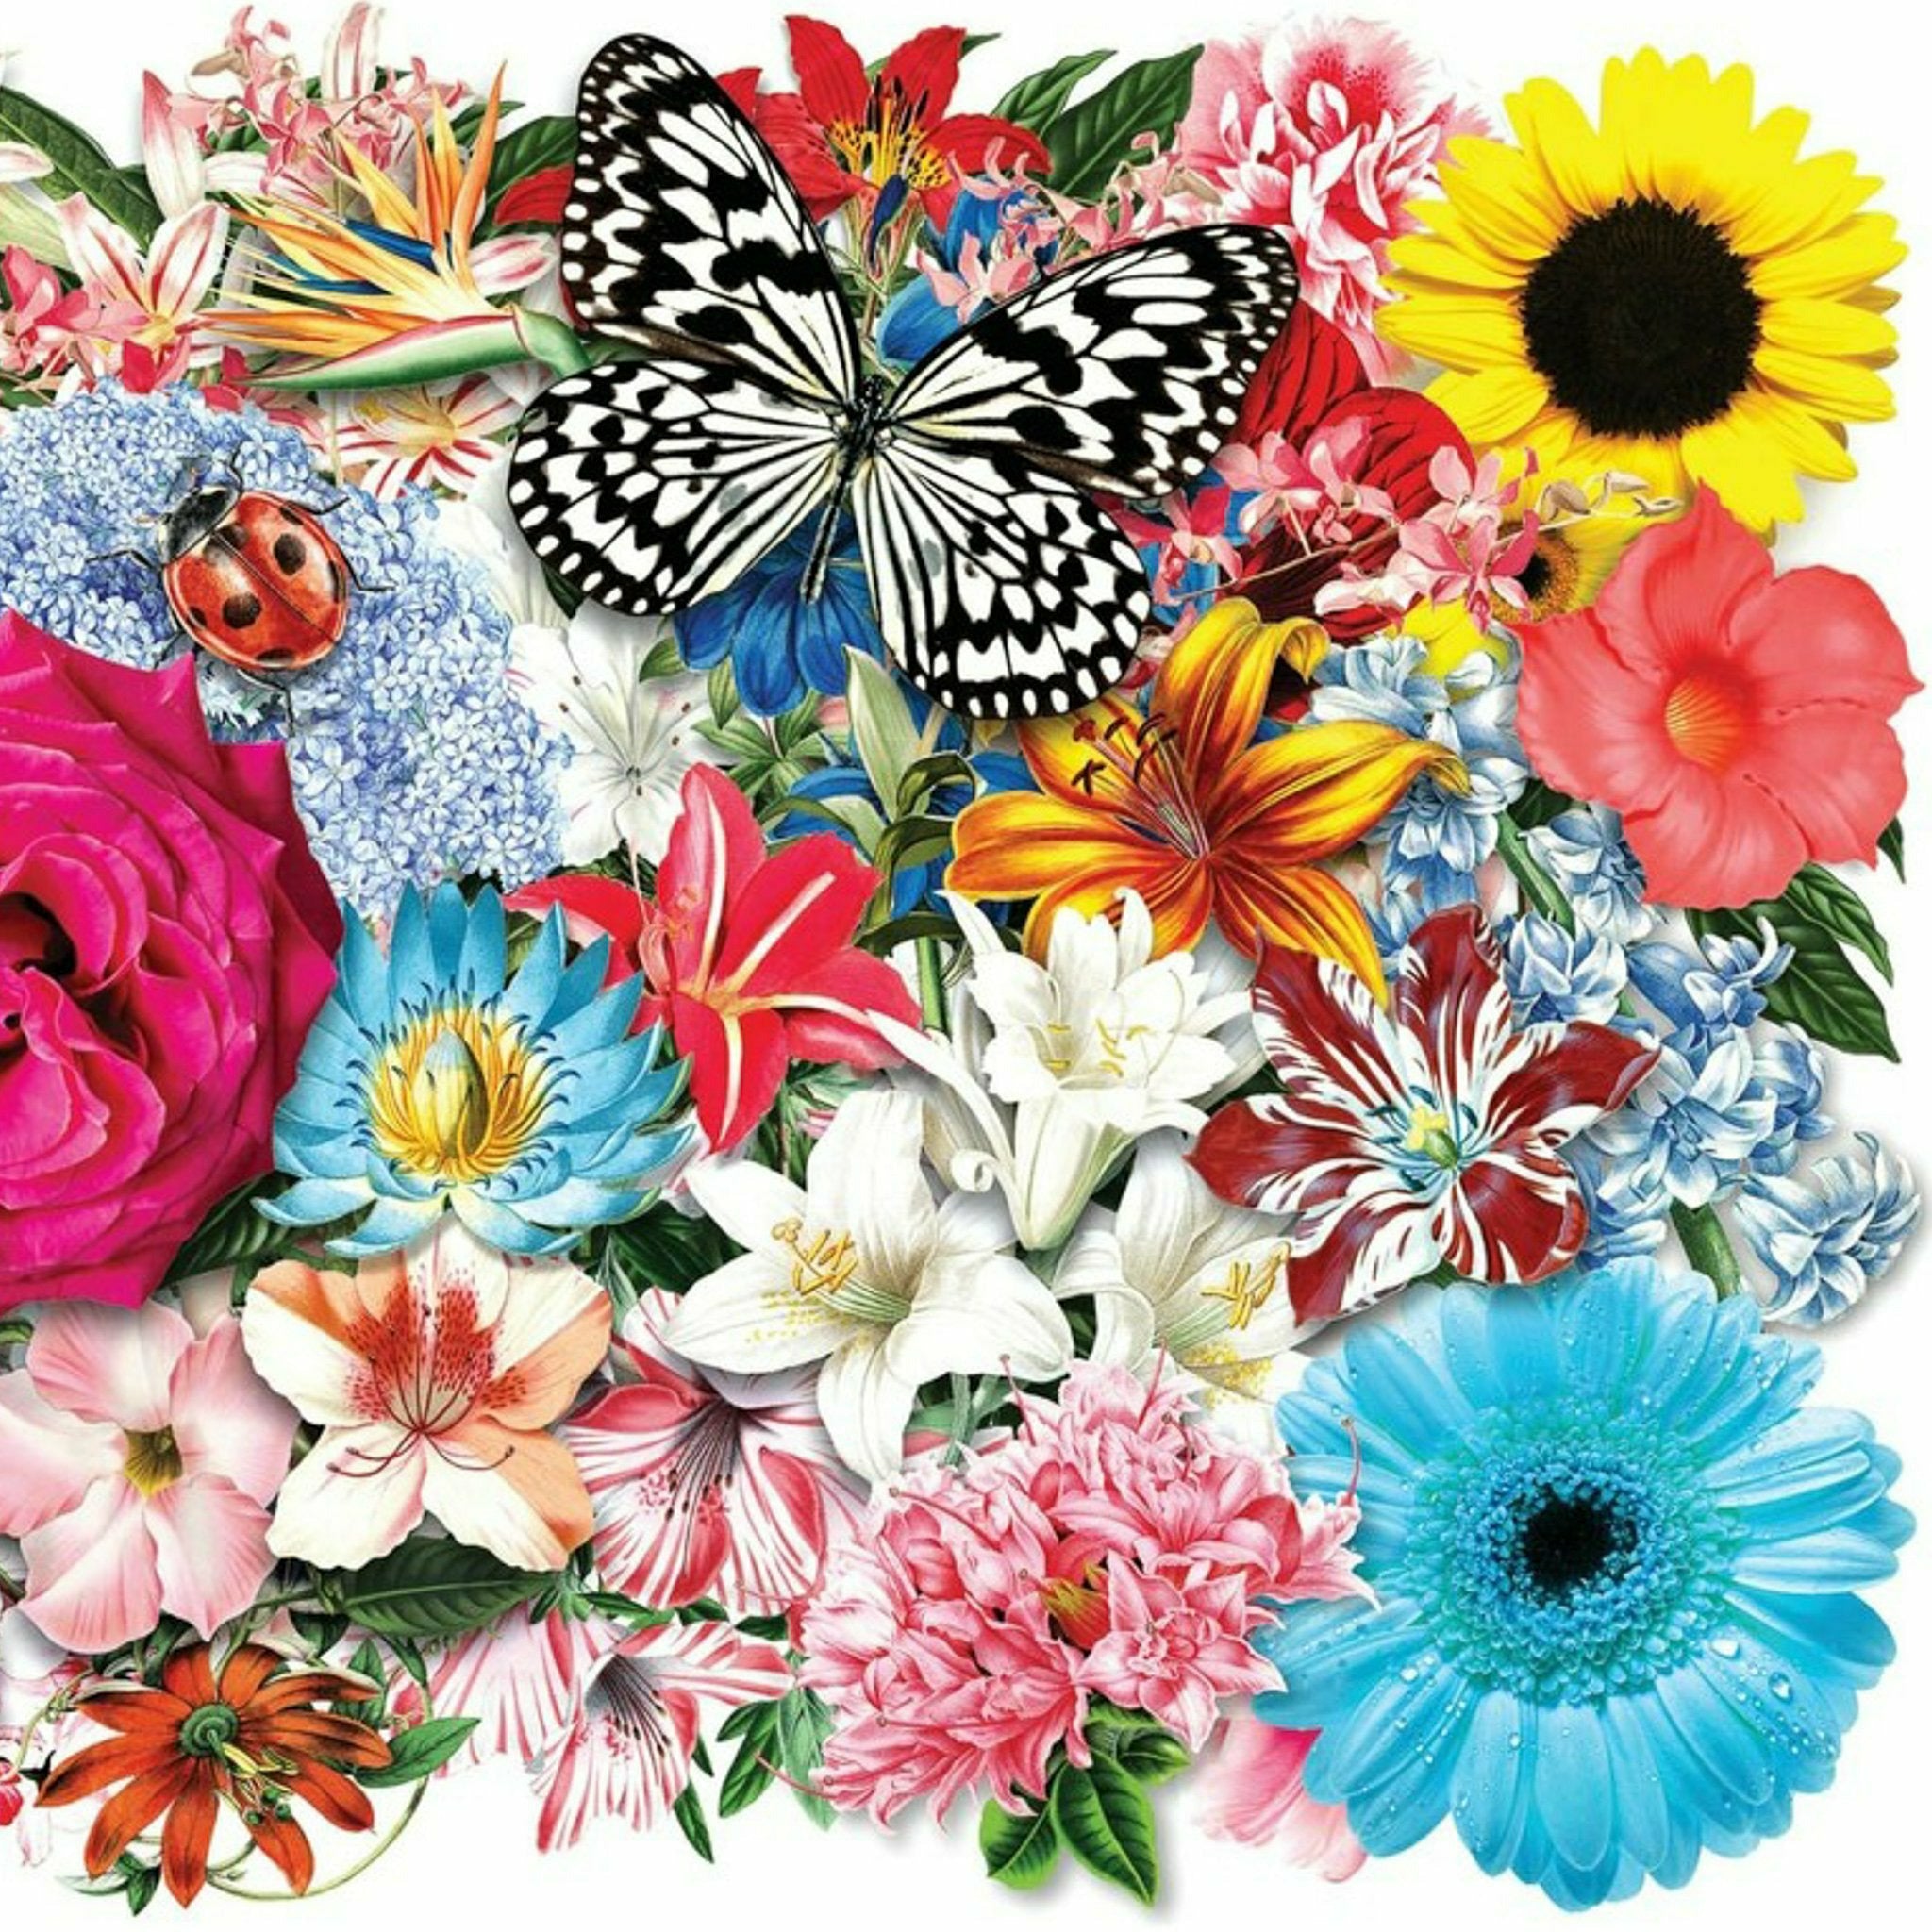 A close-up of a large rectangular bunch of colorful flowers with a big black & white butterfly on the flowers is on a white background.